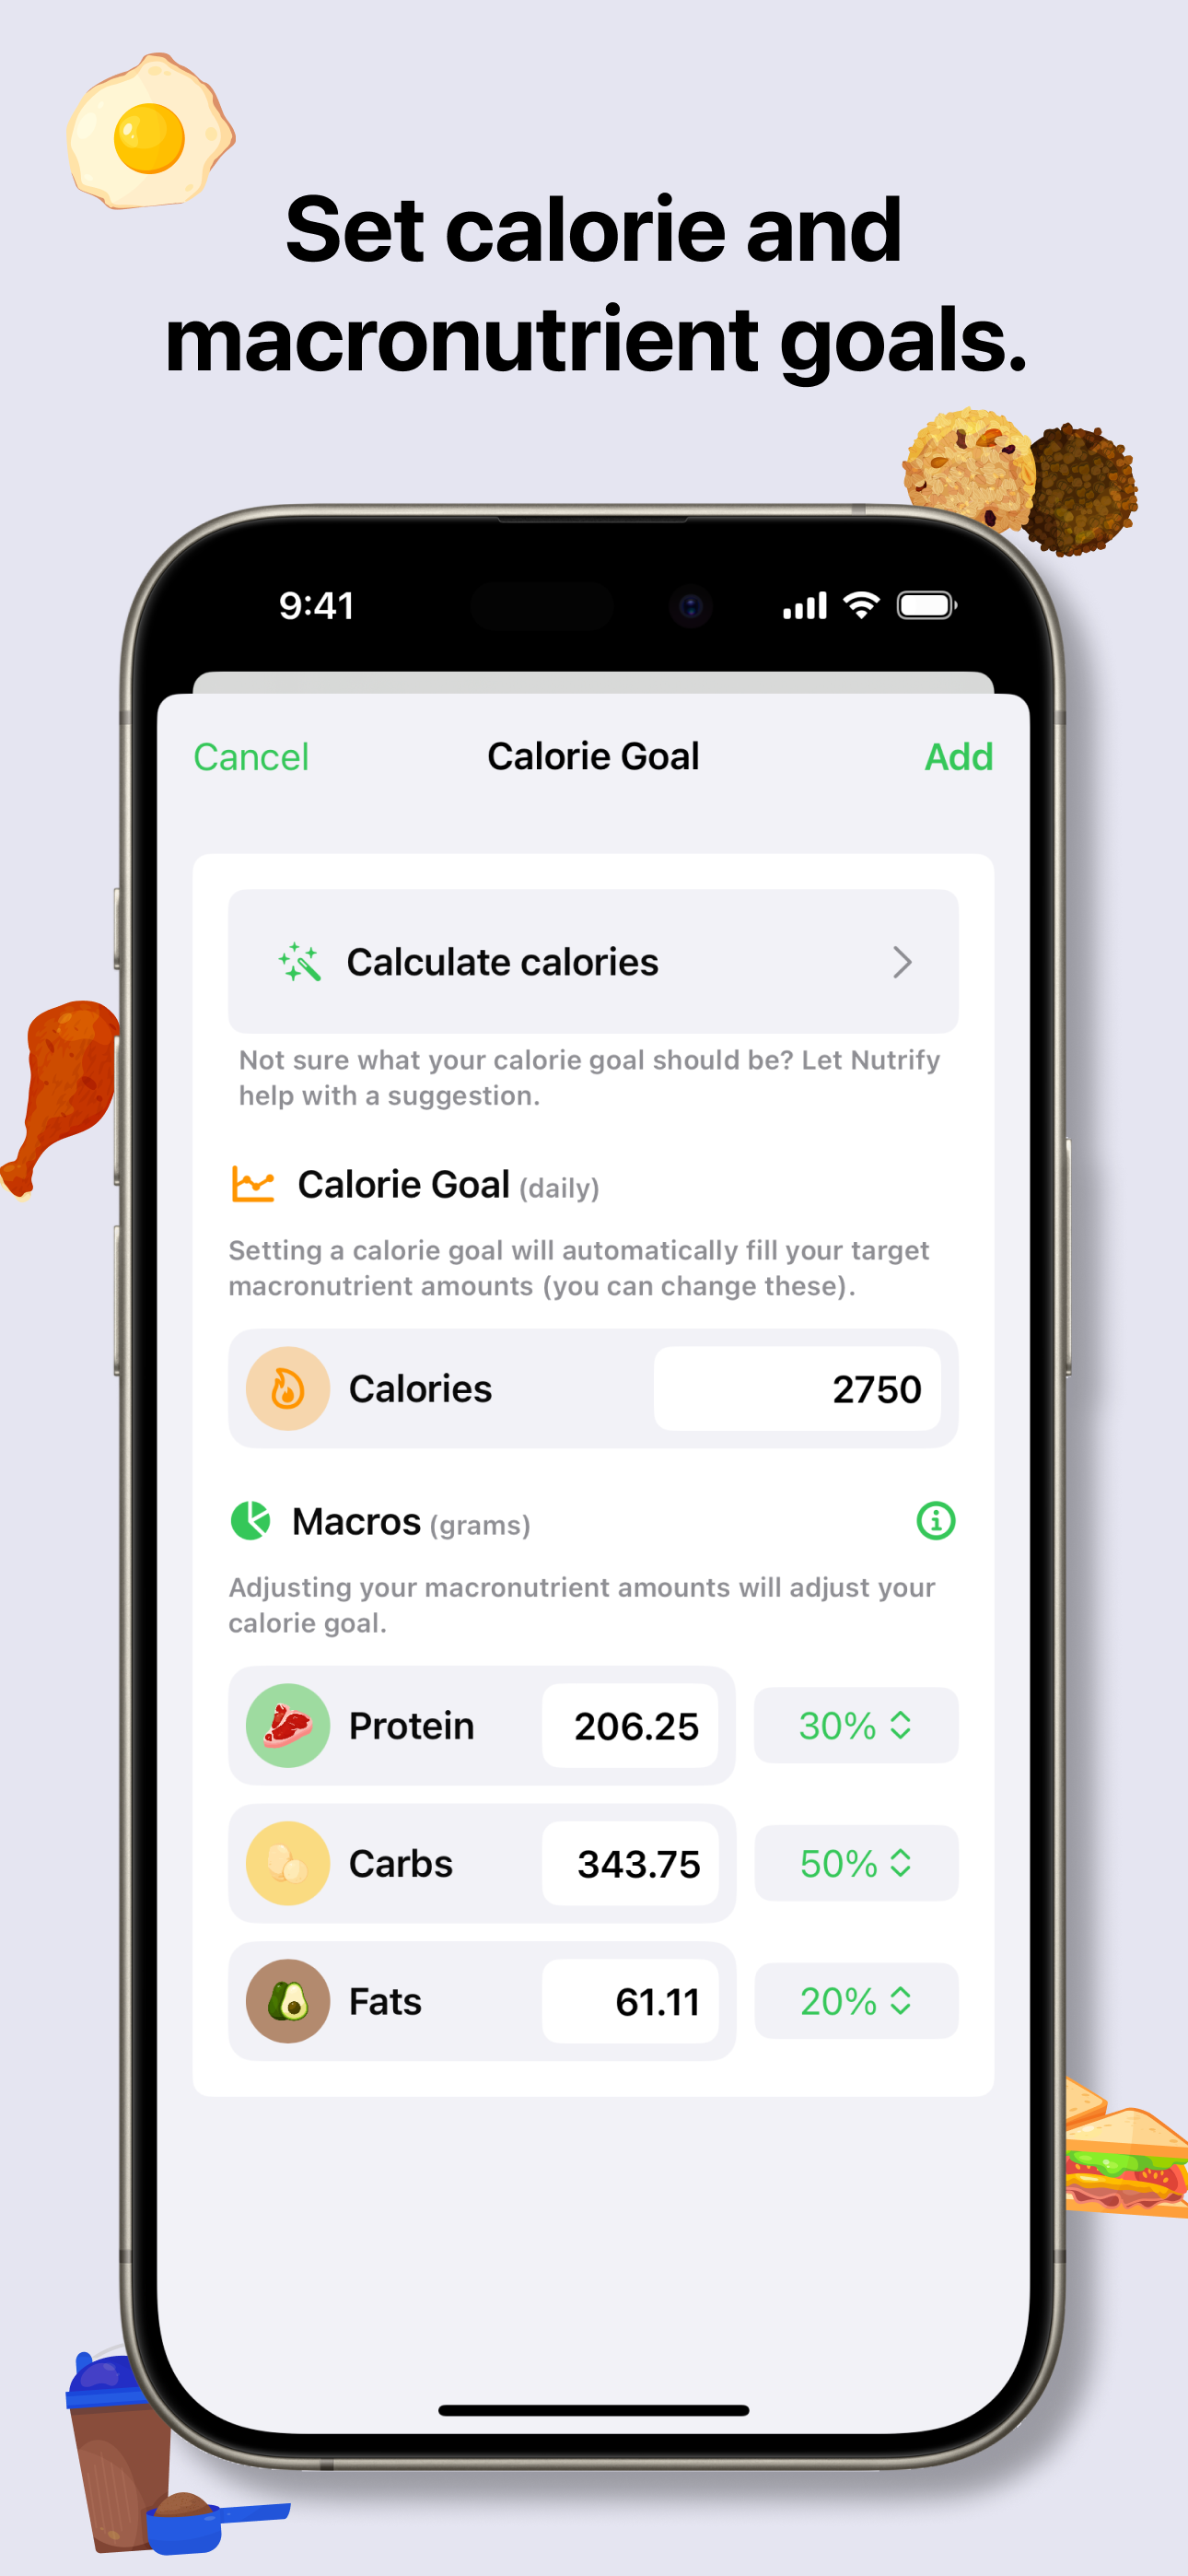 Nutrify app screenshot: A smartphone screen displaying the 'Calorie Goal' setting feature of a health app with the title 'Set calorie and macronutrient goals.' The options include 'Calculate calories,' a daily 'Calorie Goal' of 2750 kcal, and macronutrient goals for protein (206.25g, 30%), carbs (343.75g, 50%), and fats (61.11g, 20%). The background is light purple with various food icons.